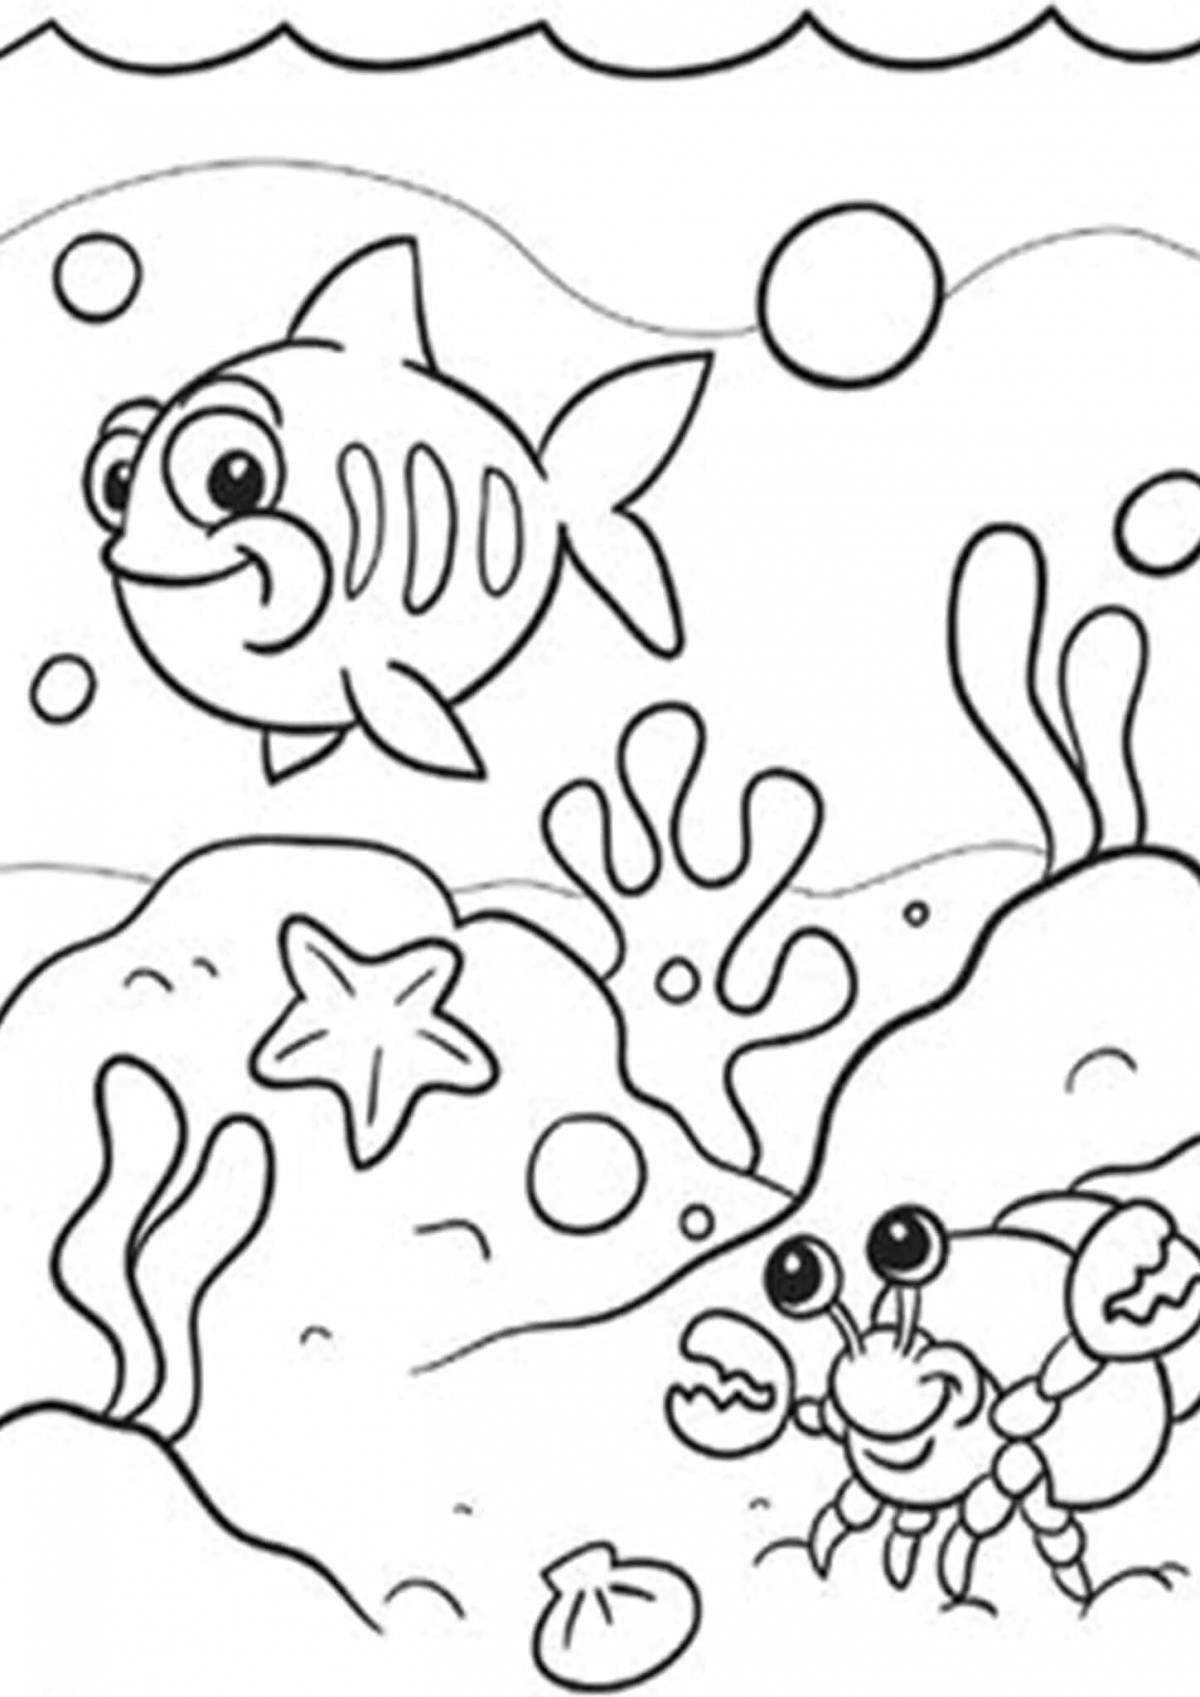 Joyful coloring of the seabed for children